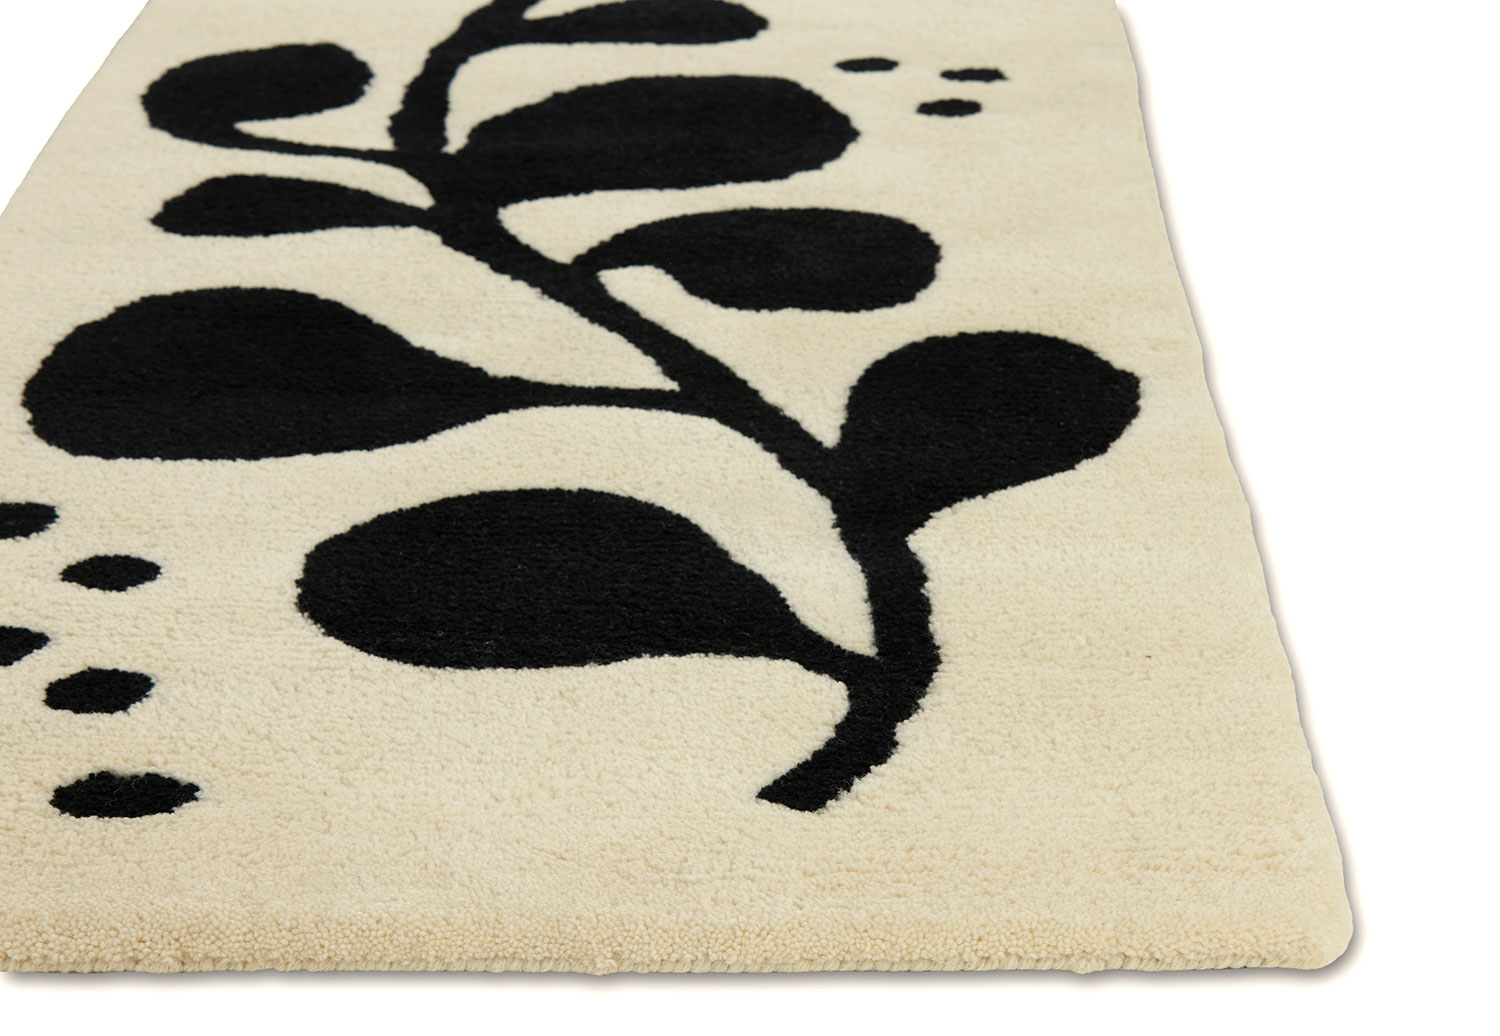 A corner detail of a neutral and black area rug with abstract designs on it called Vine Tango